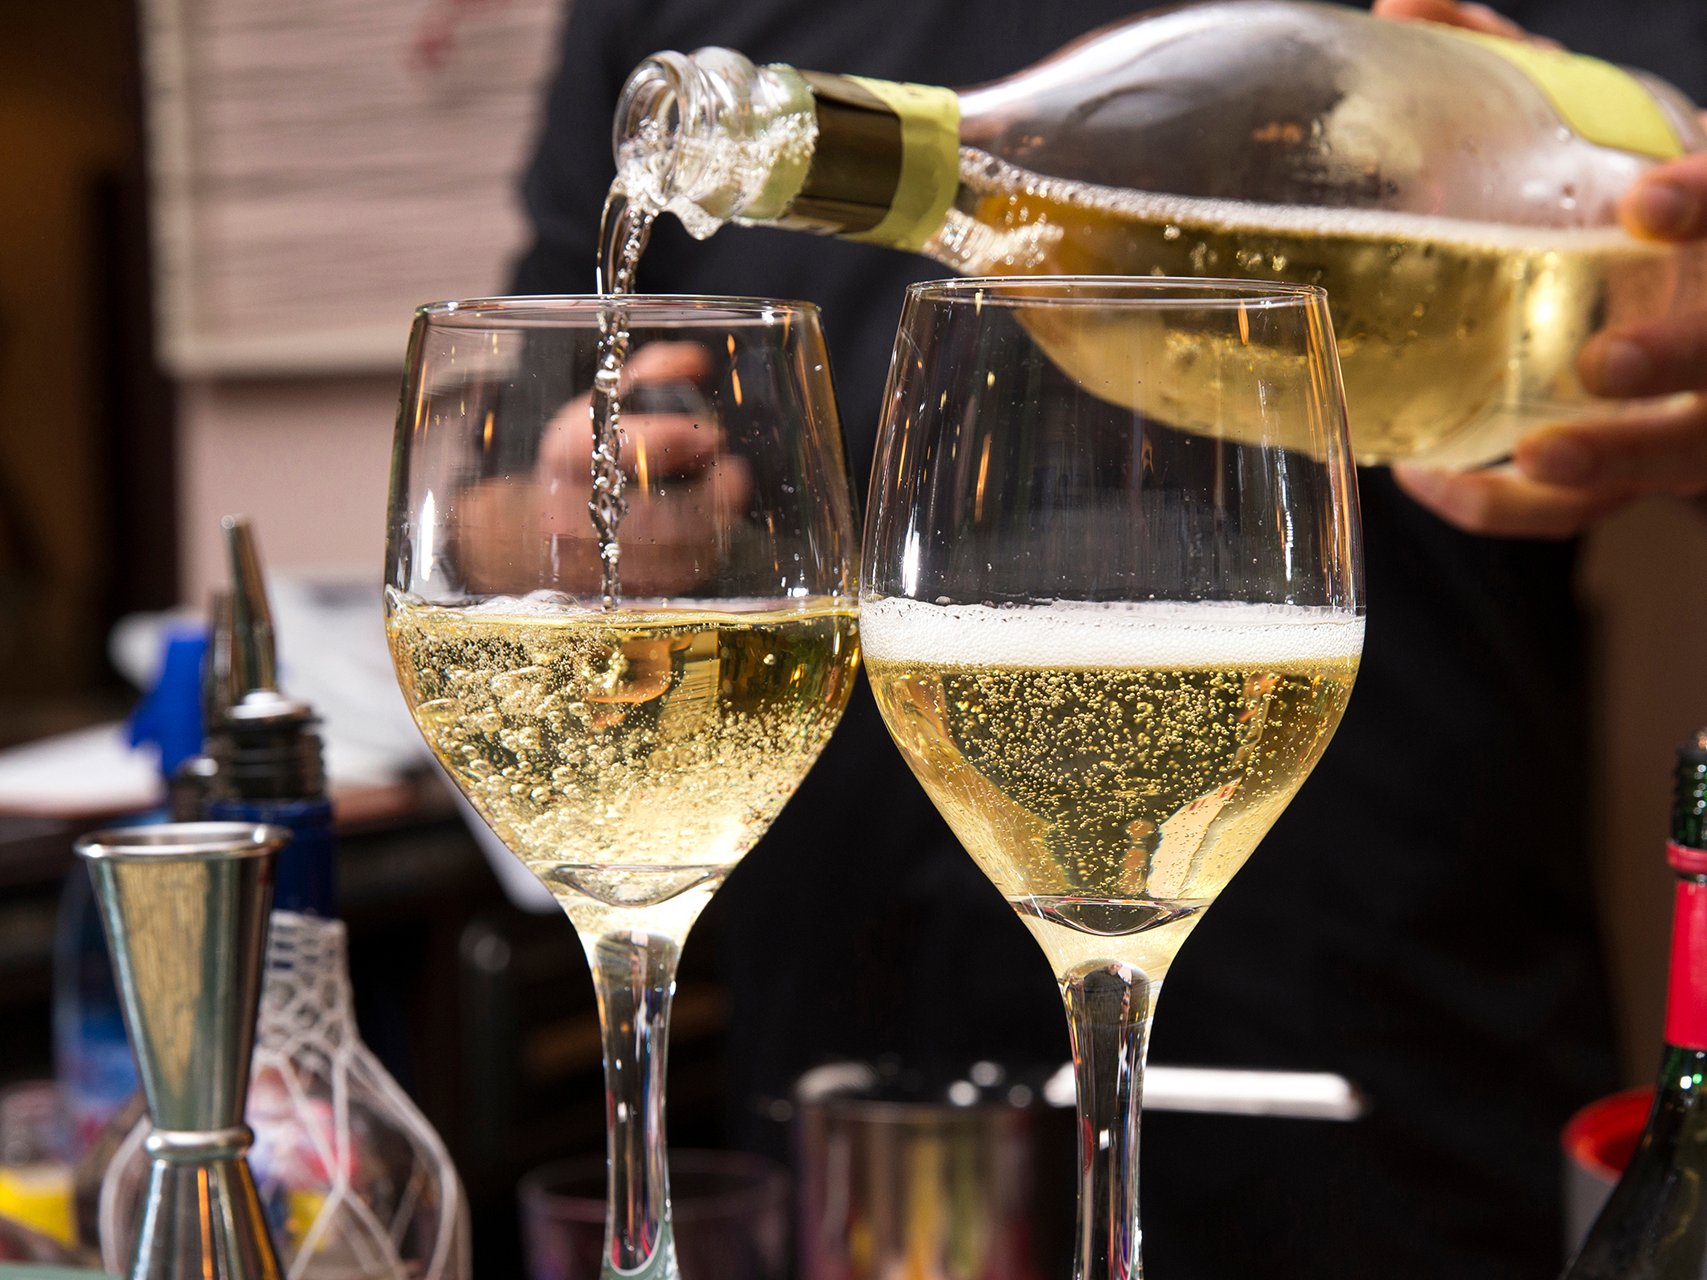 Glasses of Franciacorta: Wine has been produced in the area for centuries.